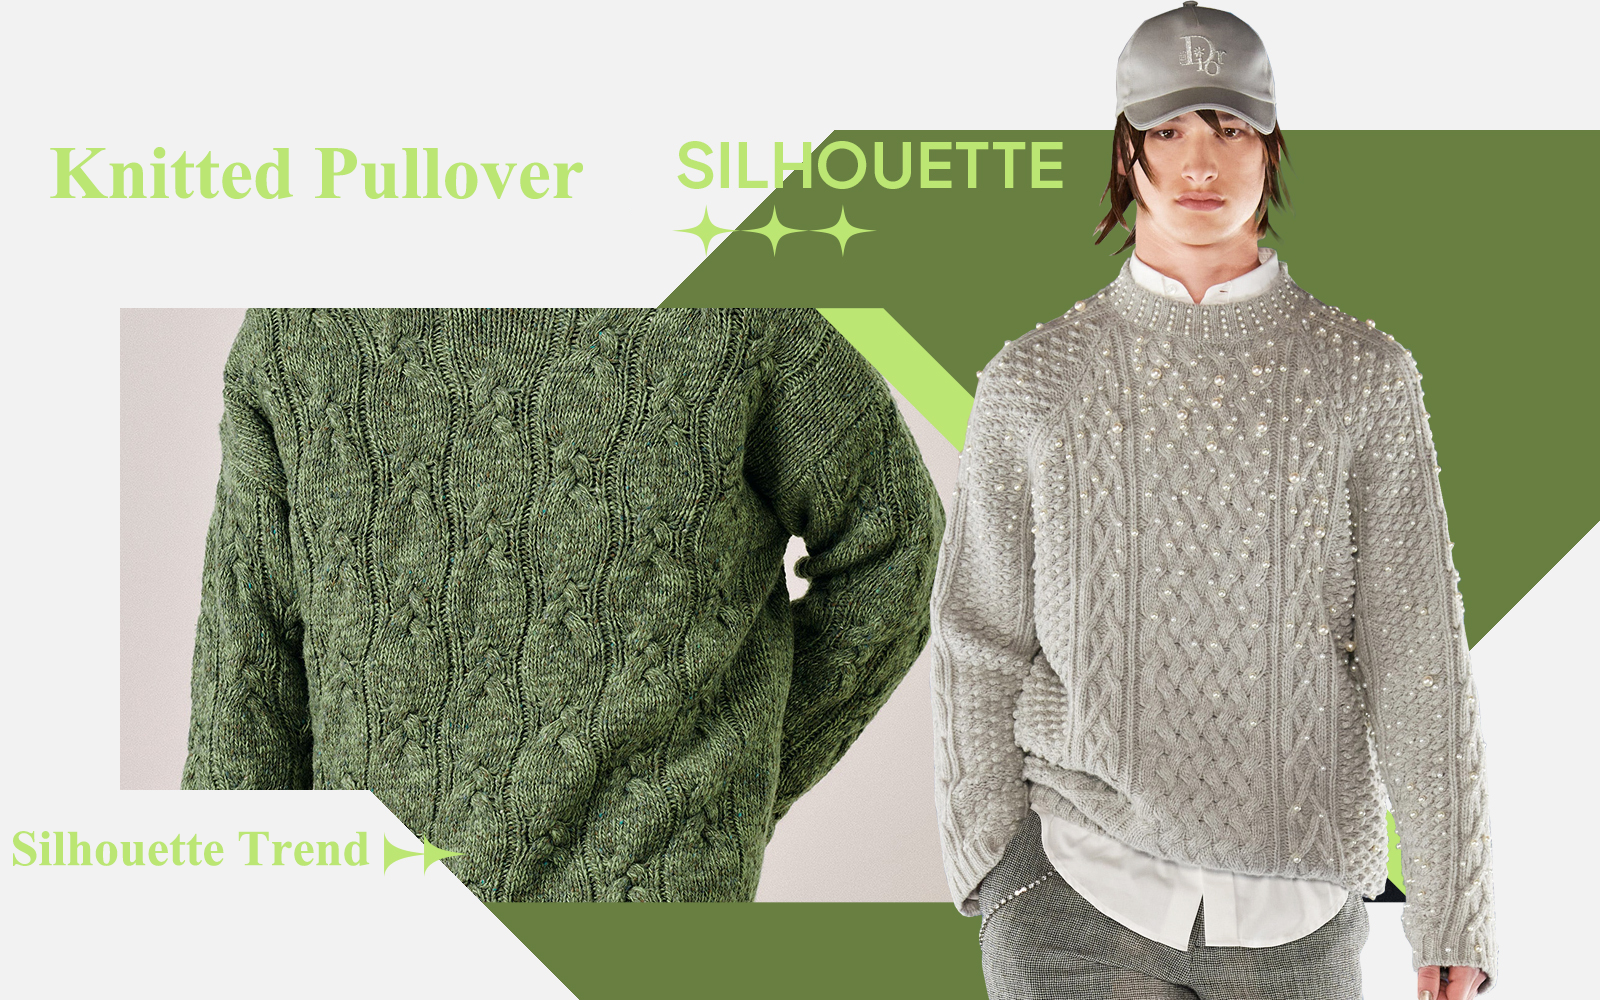 Pullover -- The A/W 23/24 Item Trend for Men's Knitwear